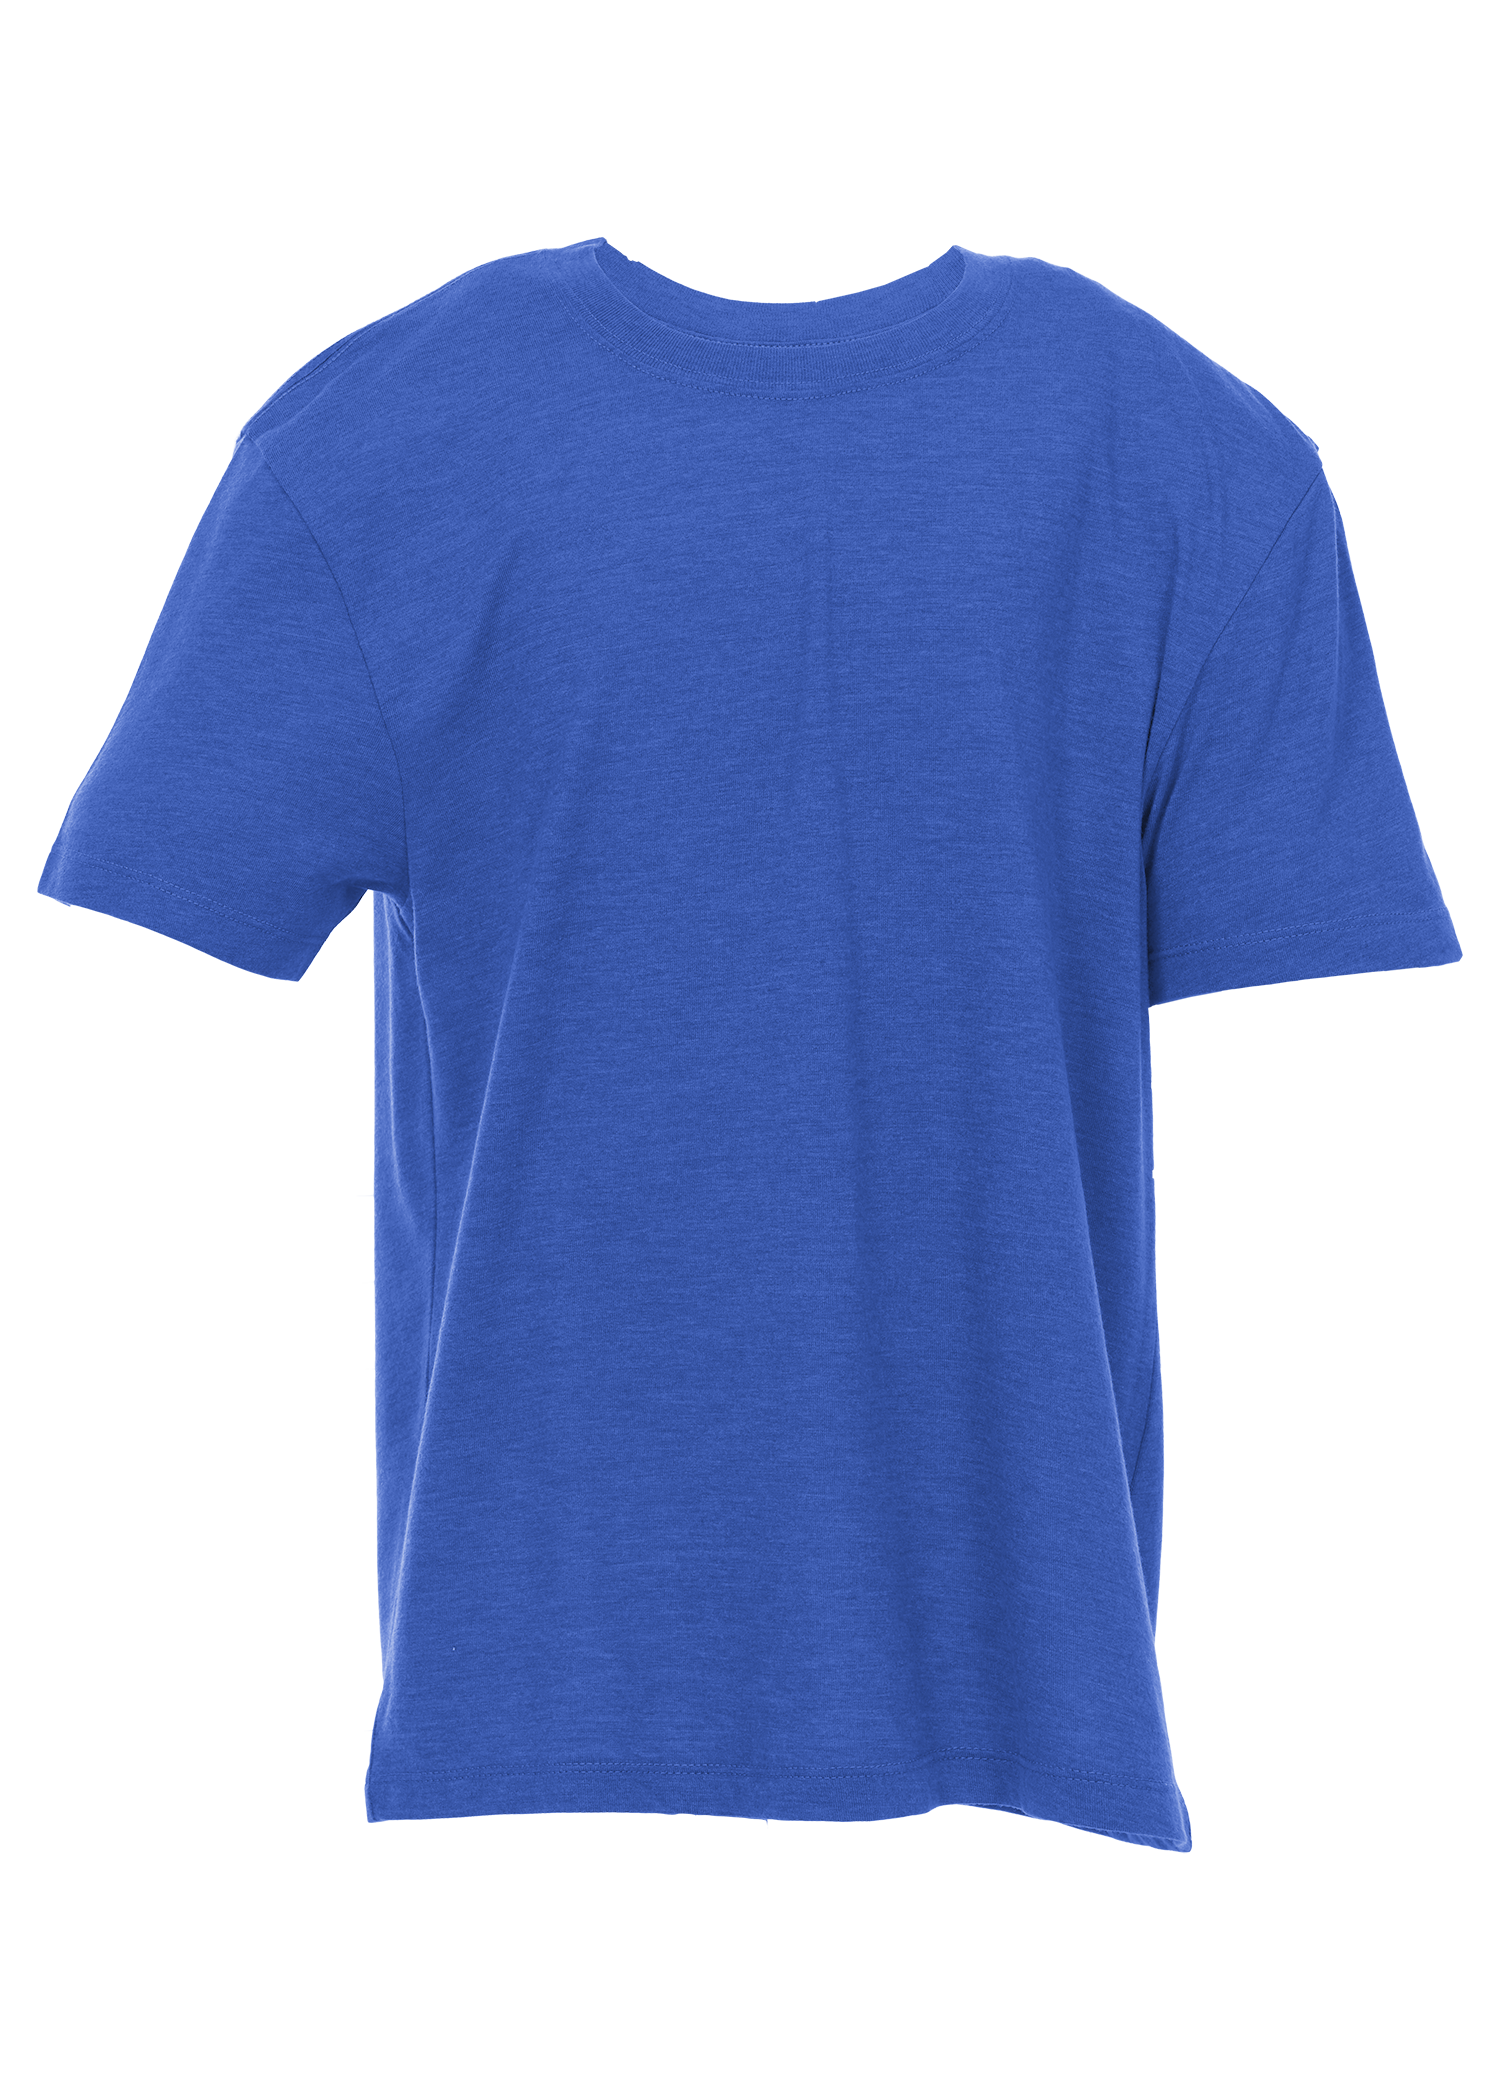 Primease P3610Y - Youth Short Sleeve Tri-Blend Tee